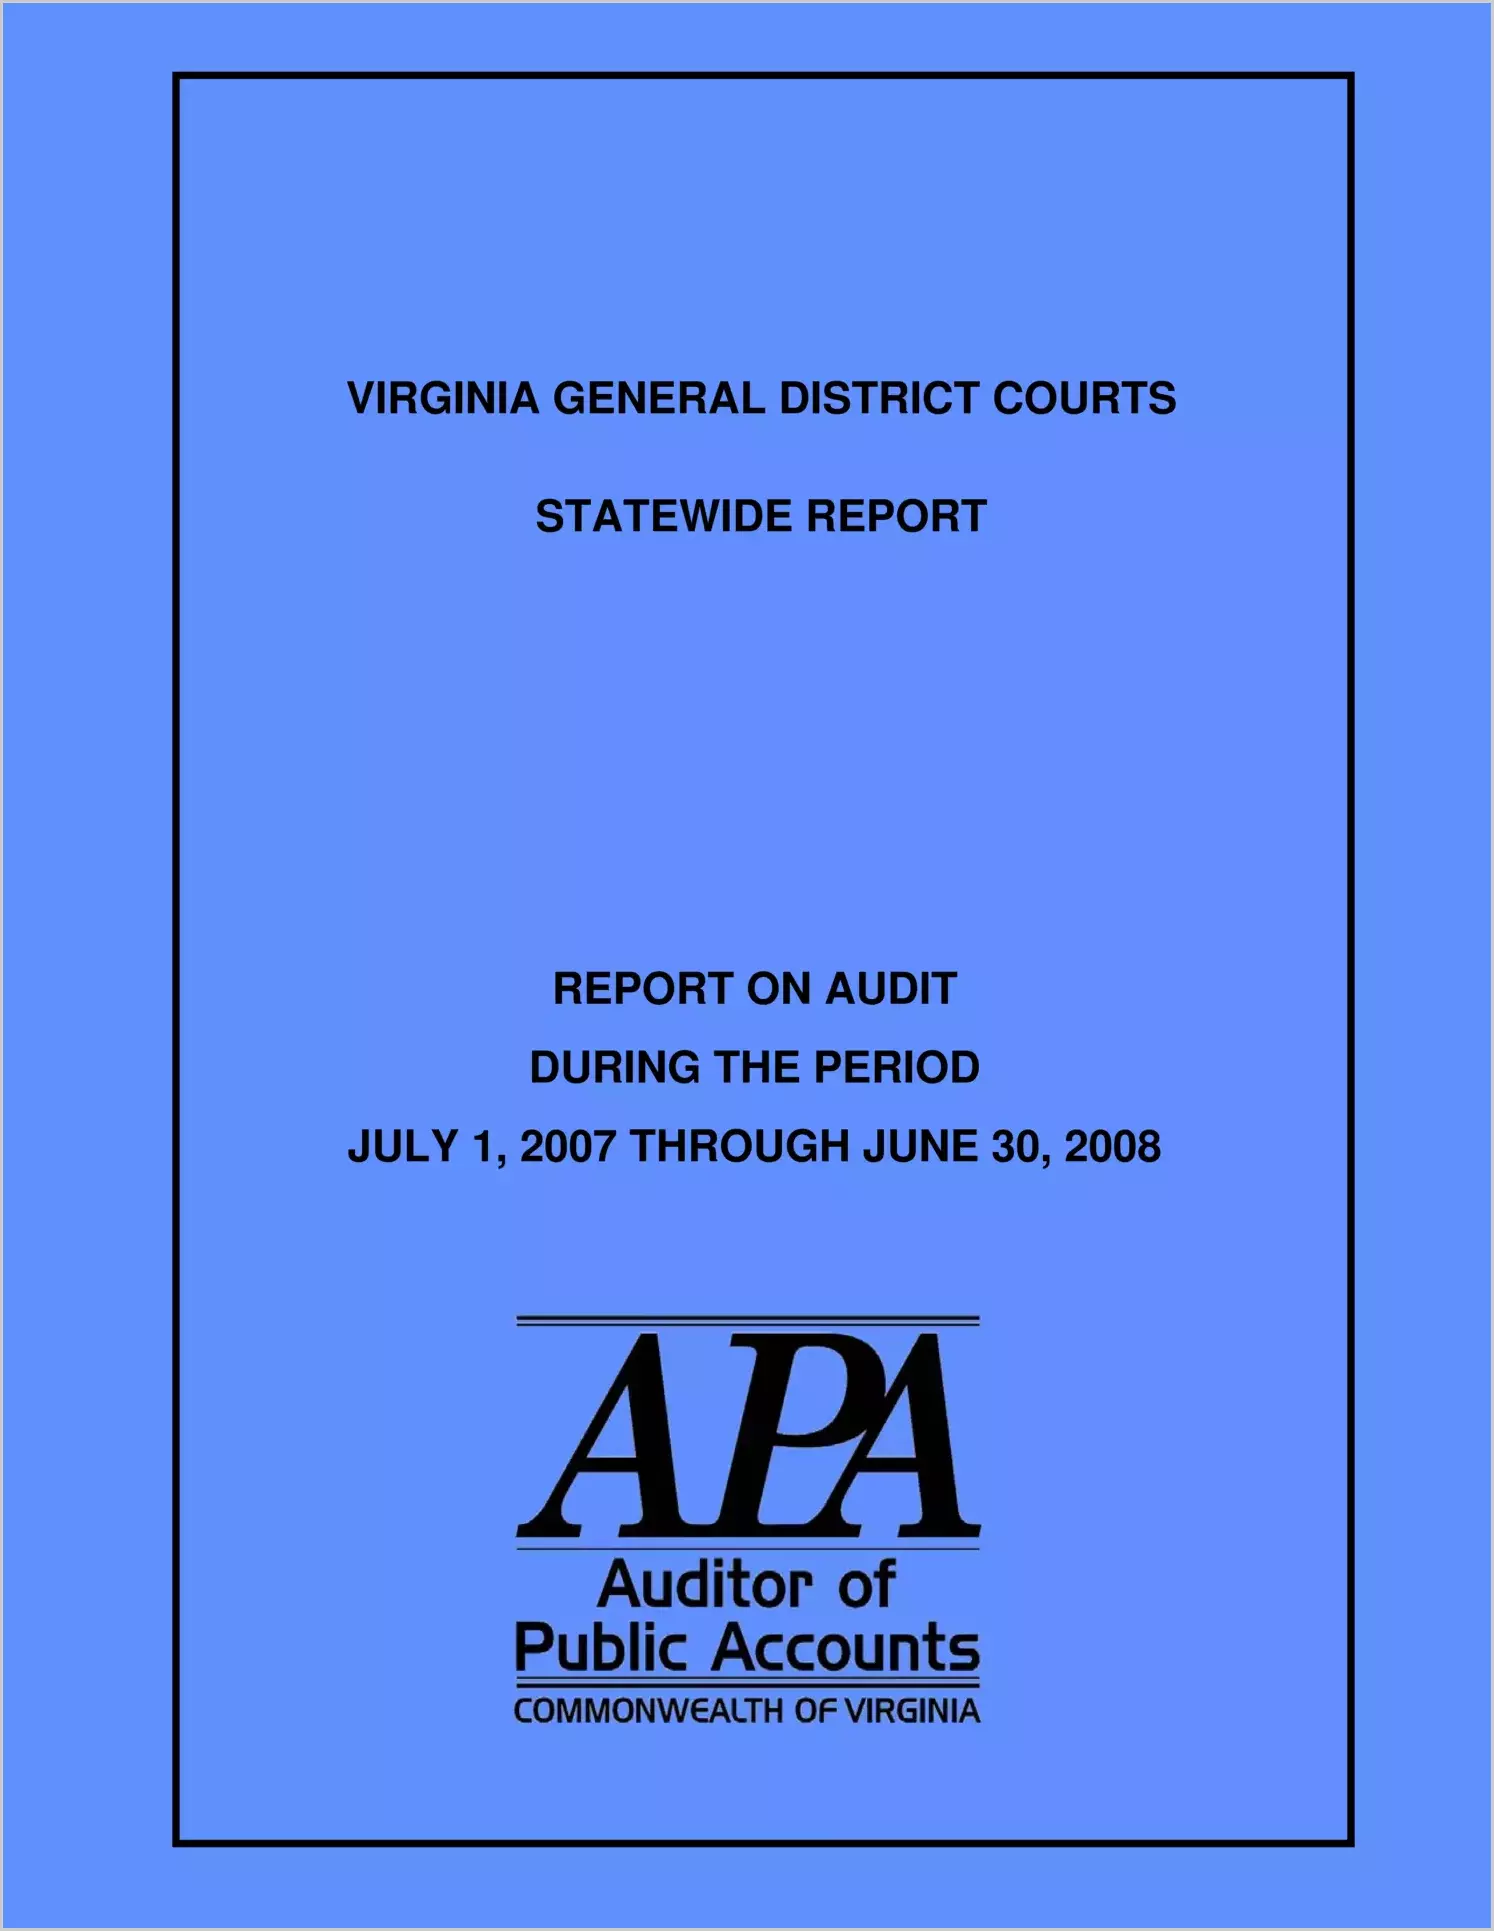 Virginia General District Courts Statewide Report on Audit during the period July 1, 2007 through June 30, 2008